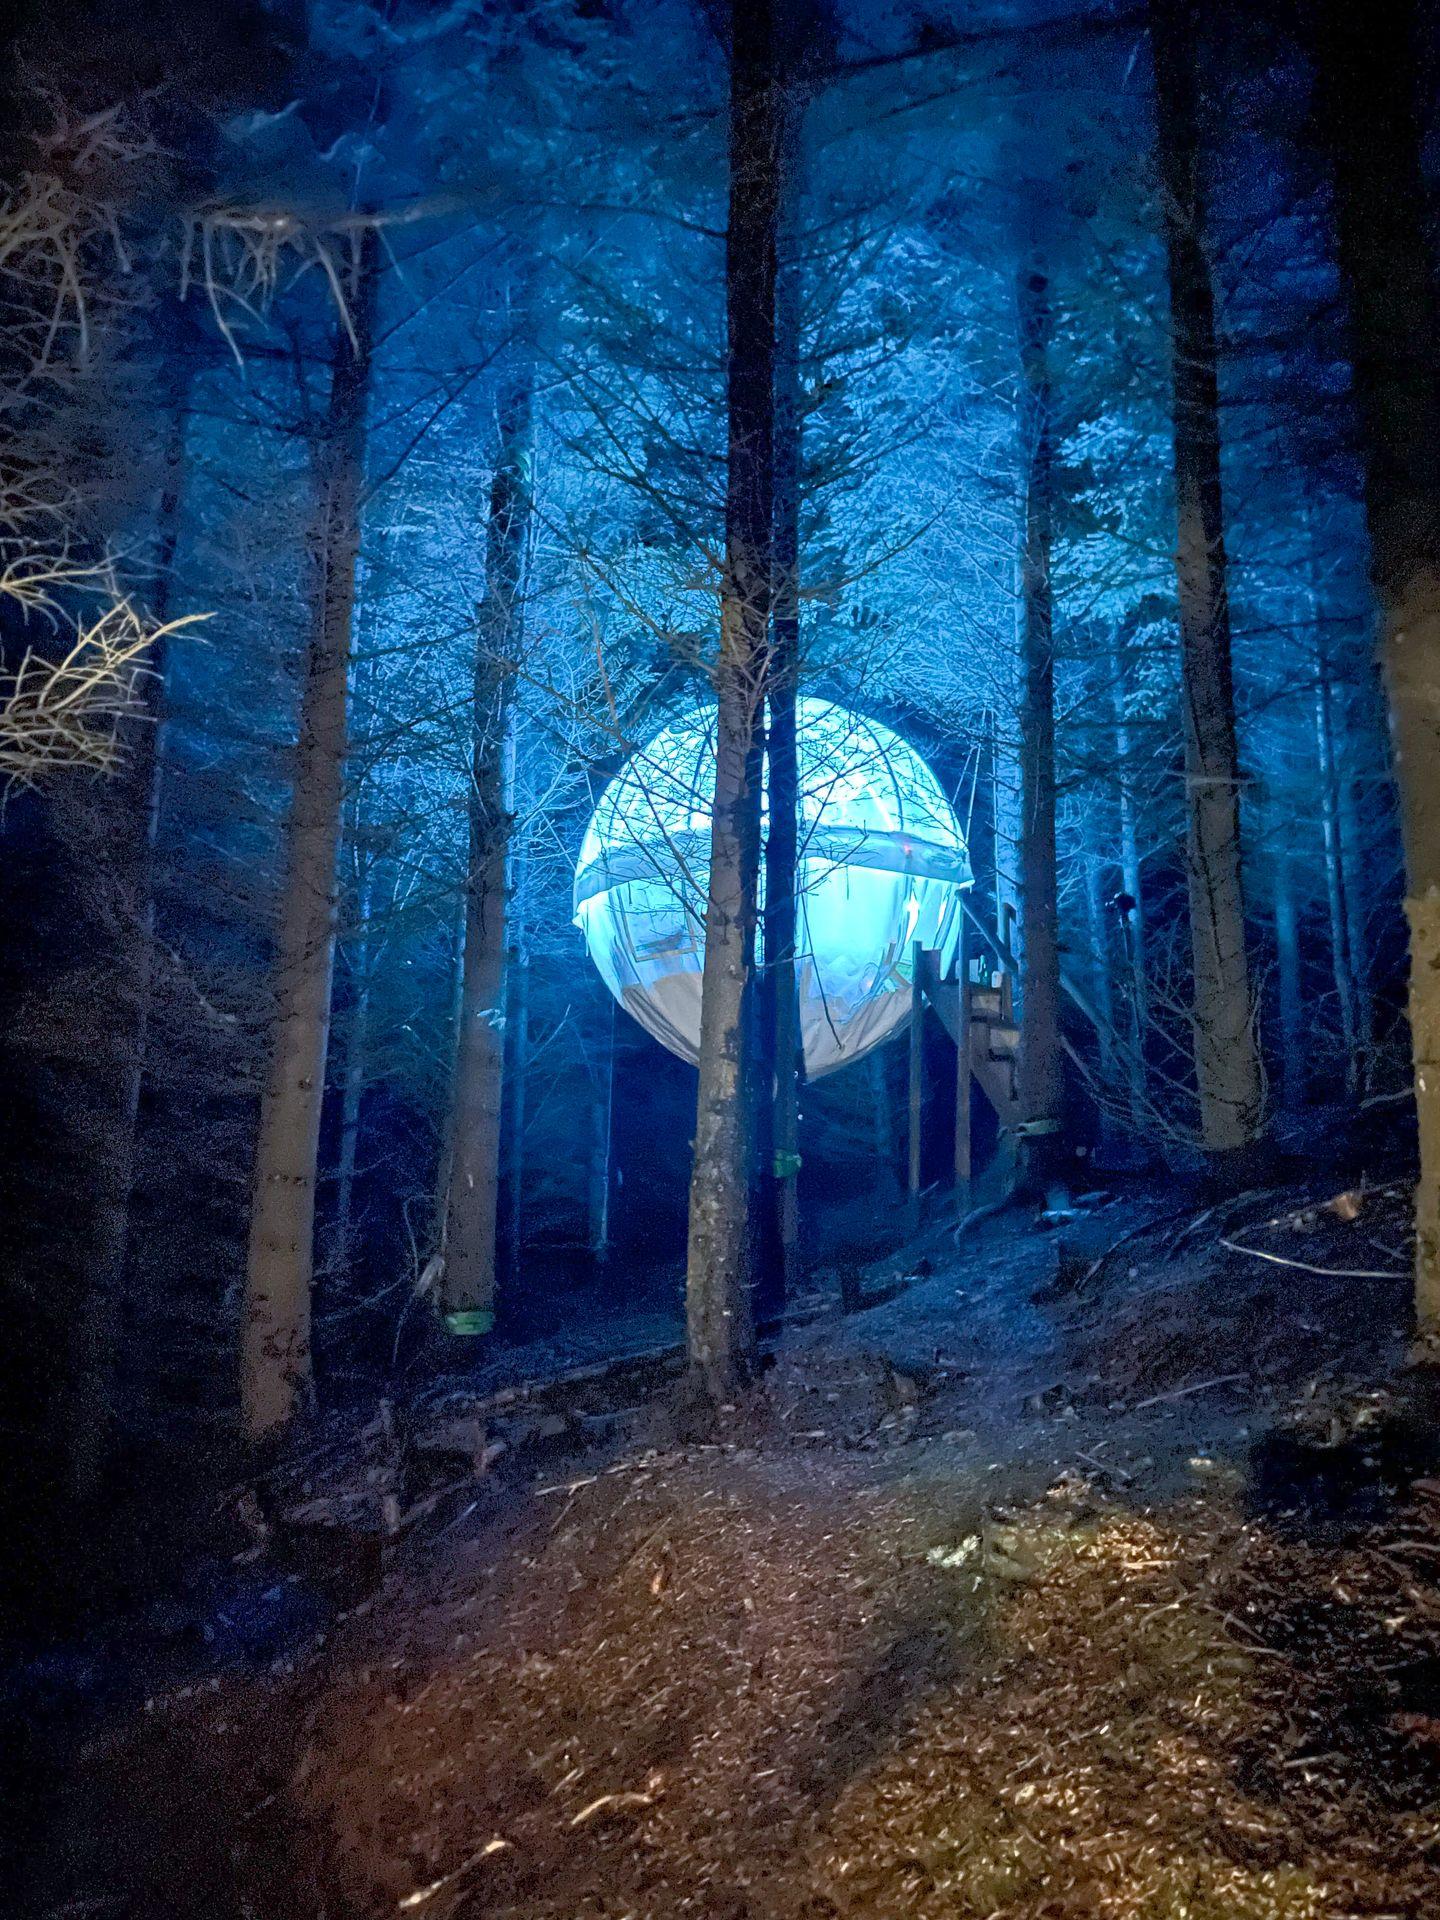 A lit-up clear bubble hanging among tall trees.